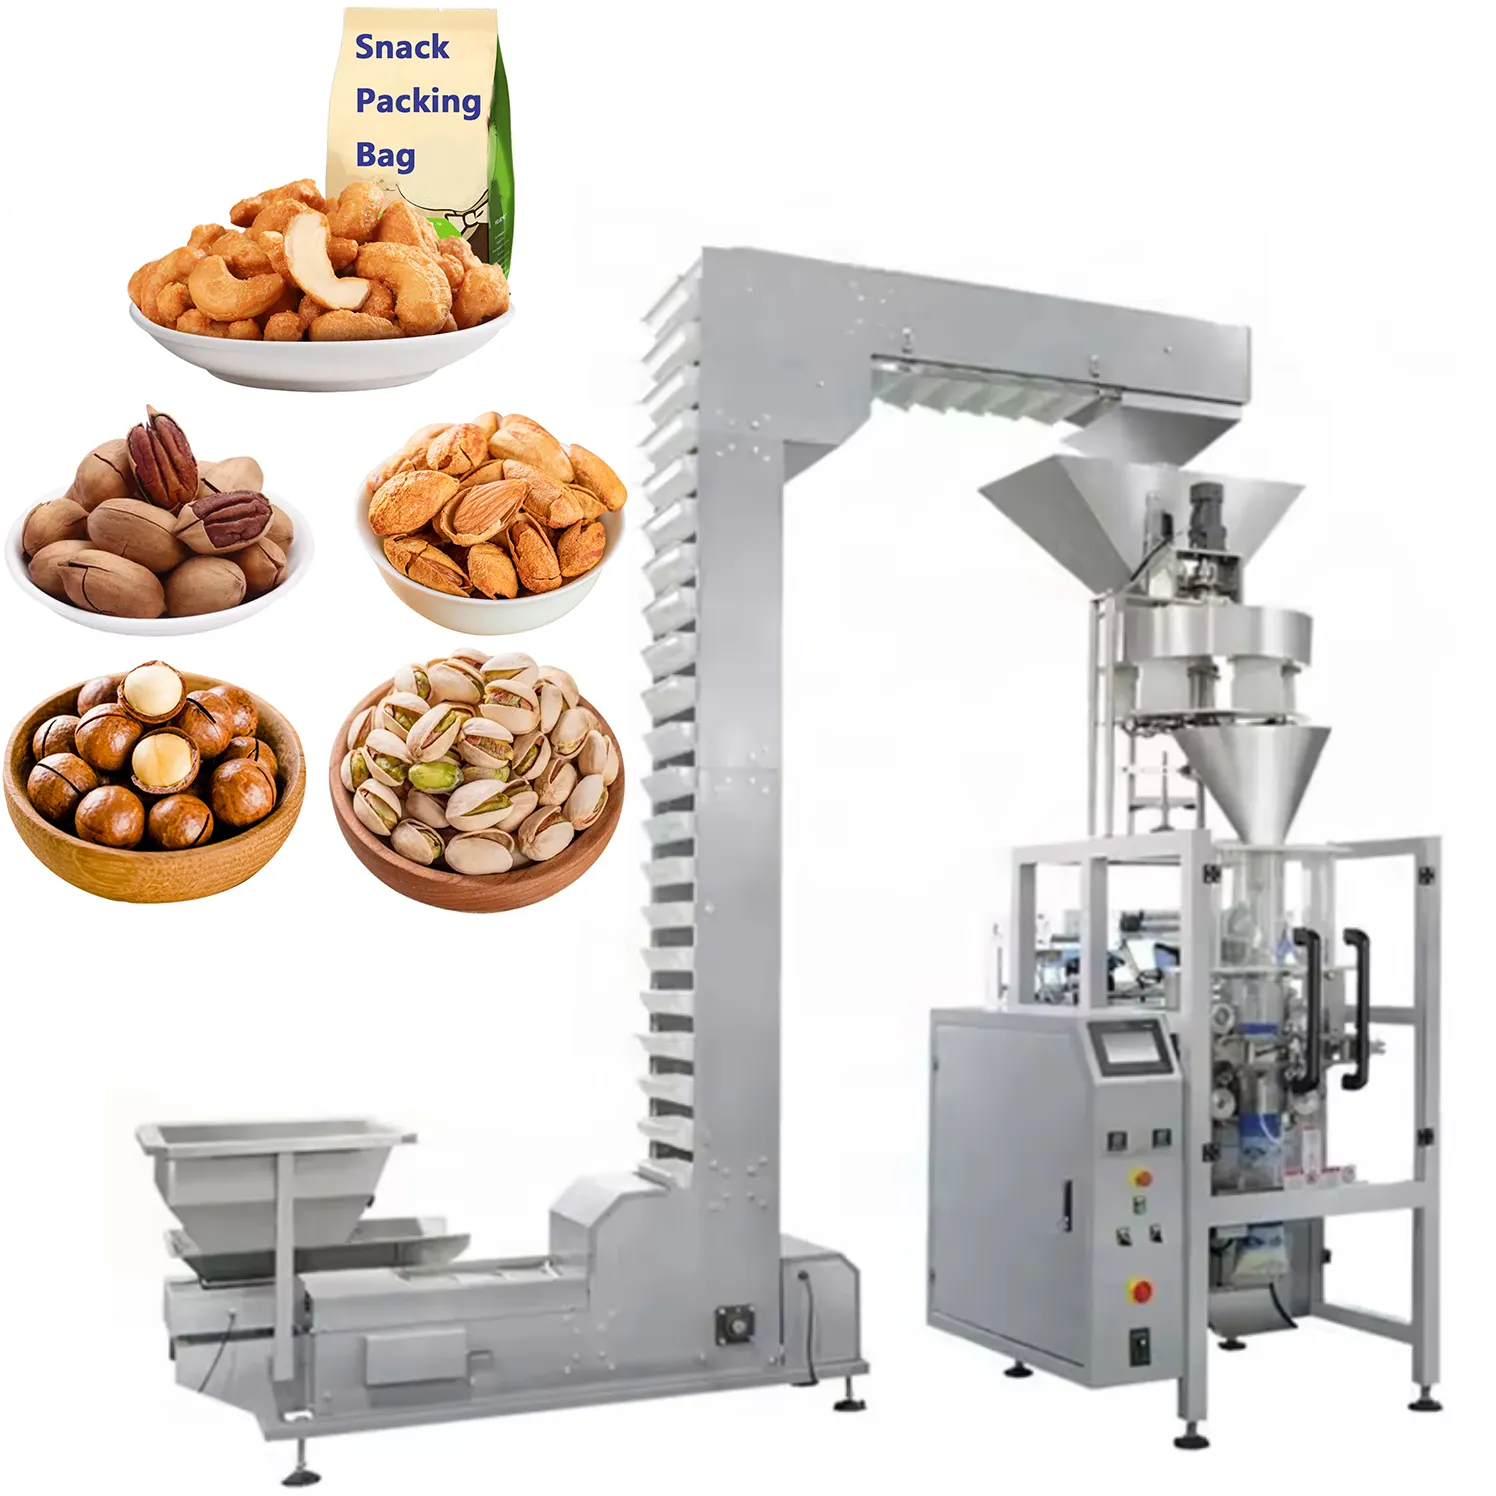 Multihead Weigher Full Automatic Vertical Packaging Machine Vffs Weighing Nuts Chips Bag Packing Machine